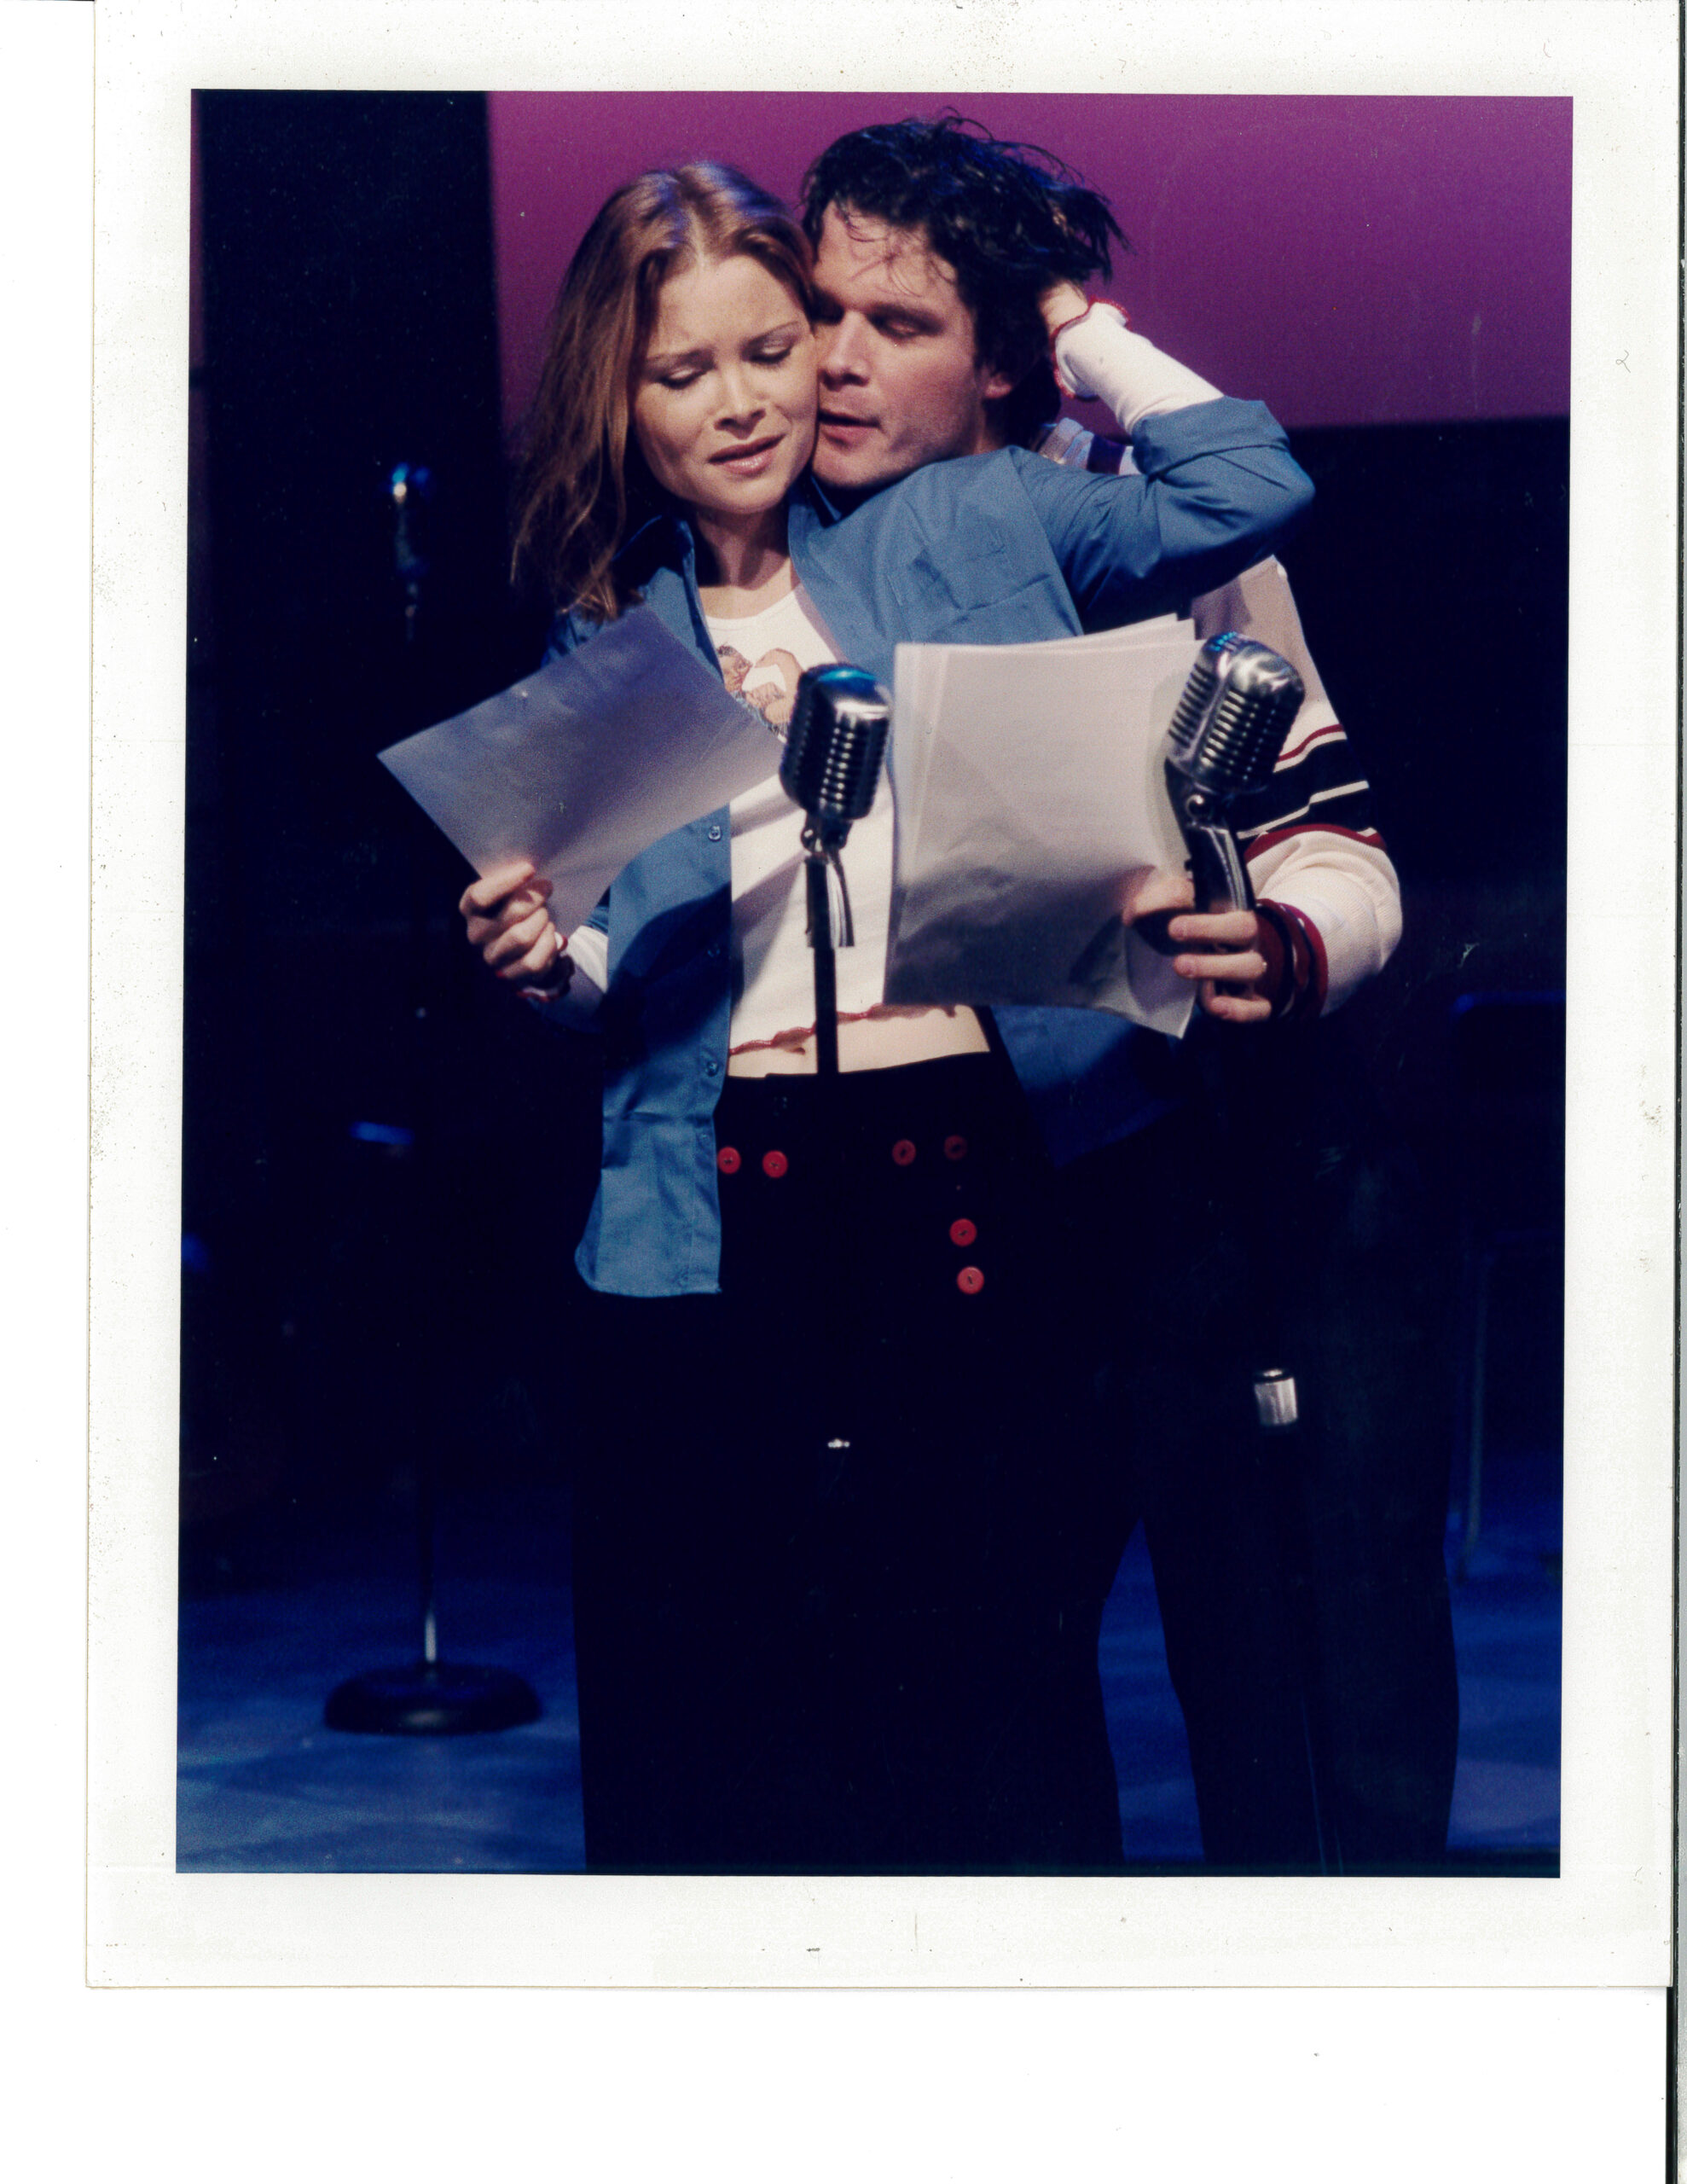 A man and woman hold each other lovingly while singing in front of radio mics, holding sheets of music